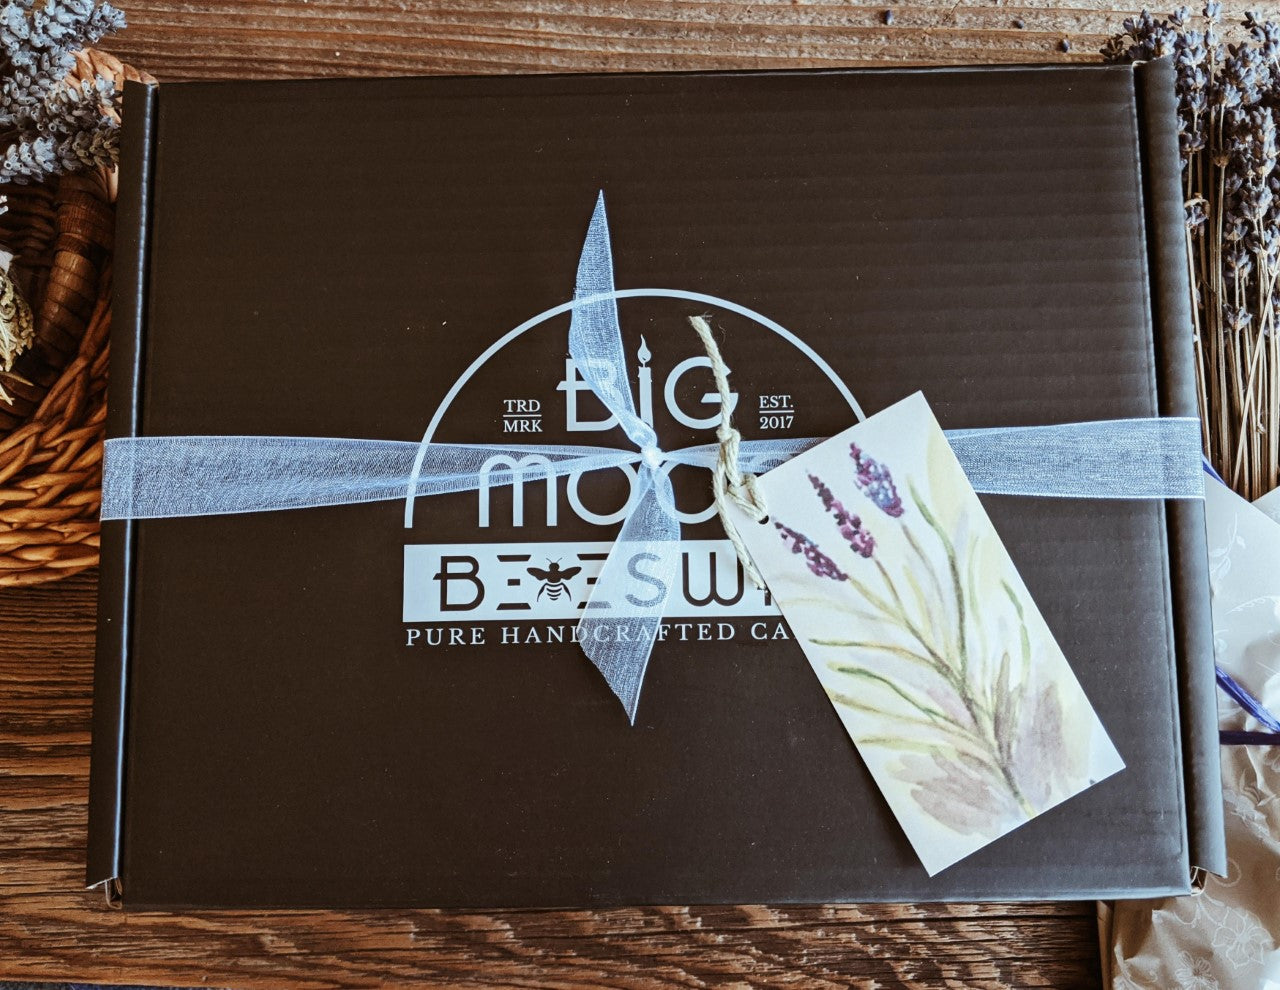 large black Big Moon Beeswax branded gift box tied with a white ribbon.